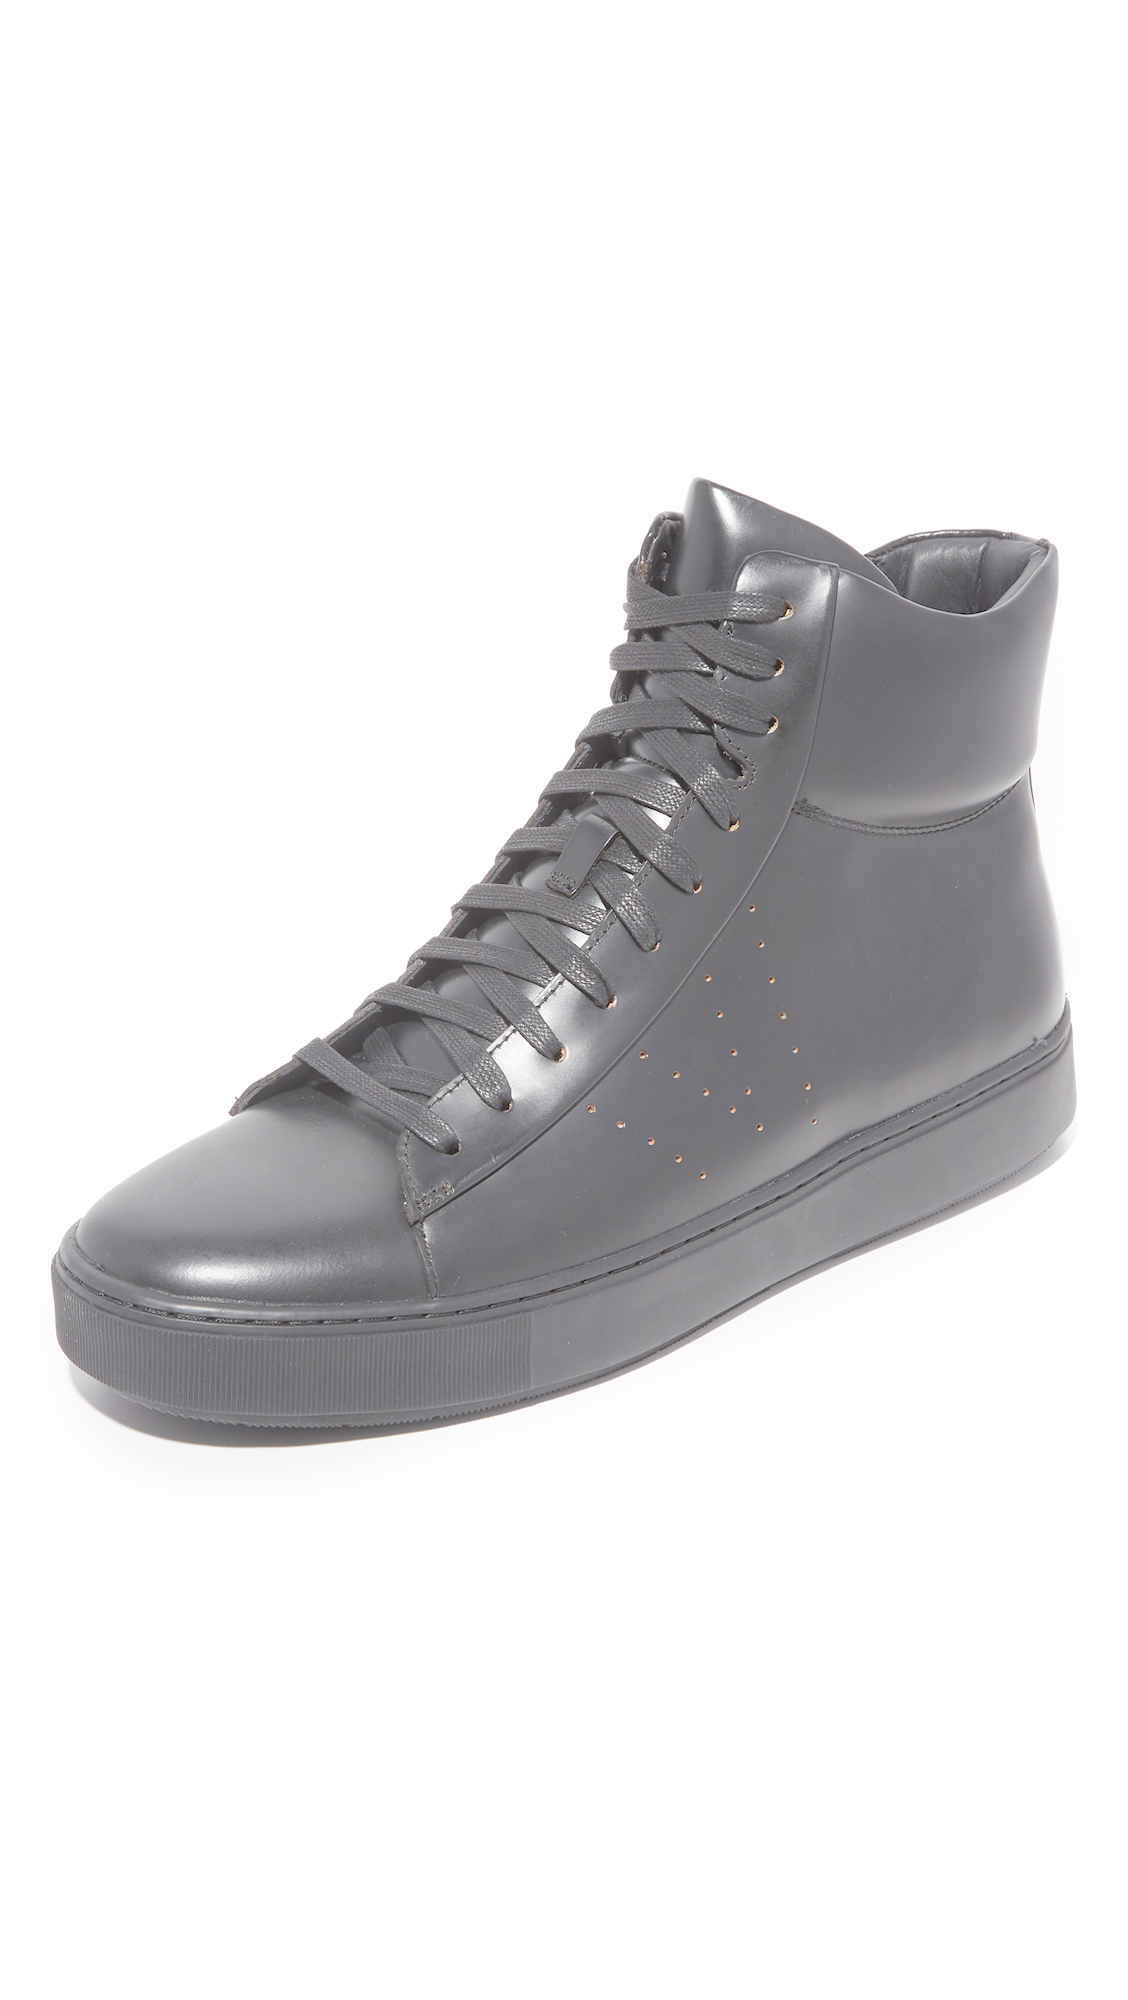 Lyst - Vince Liam High Top Sneakers in Black for Men